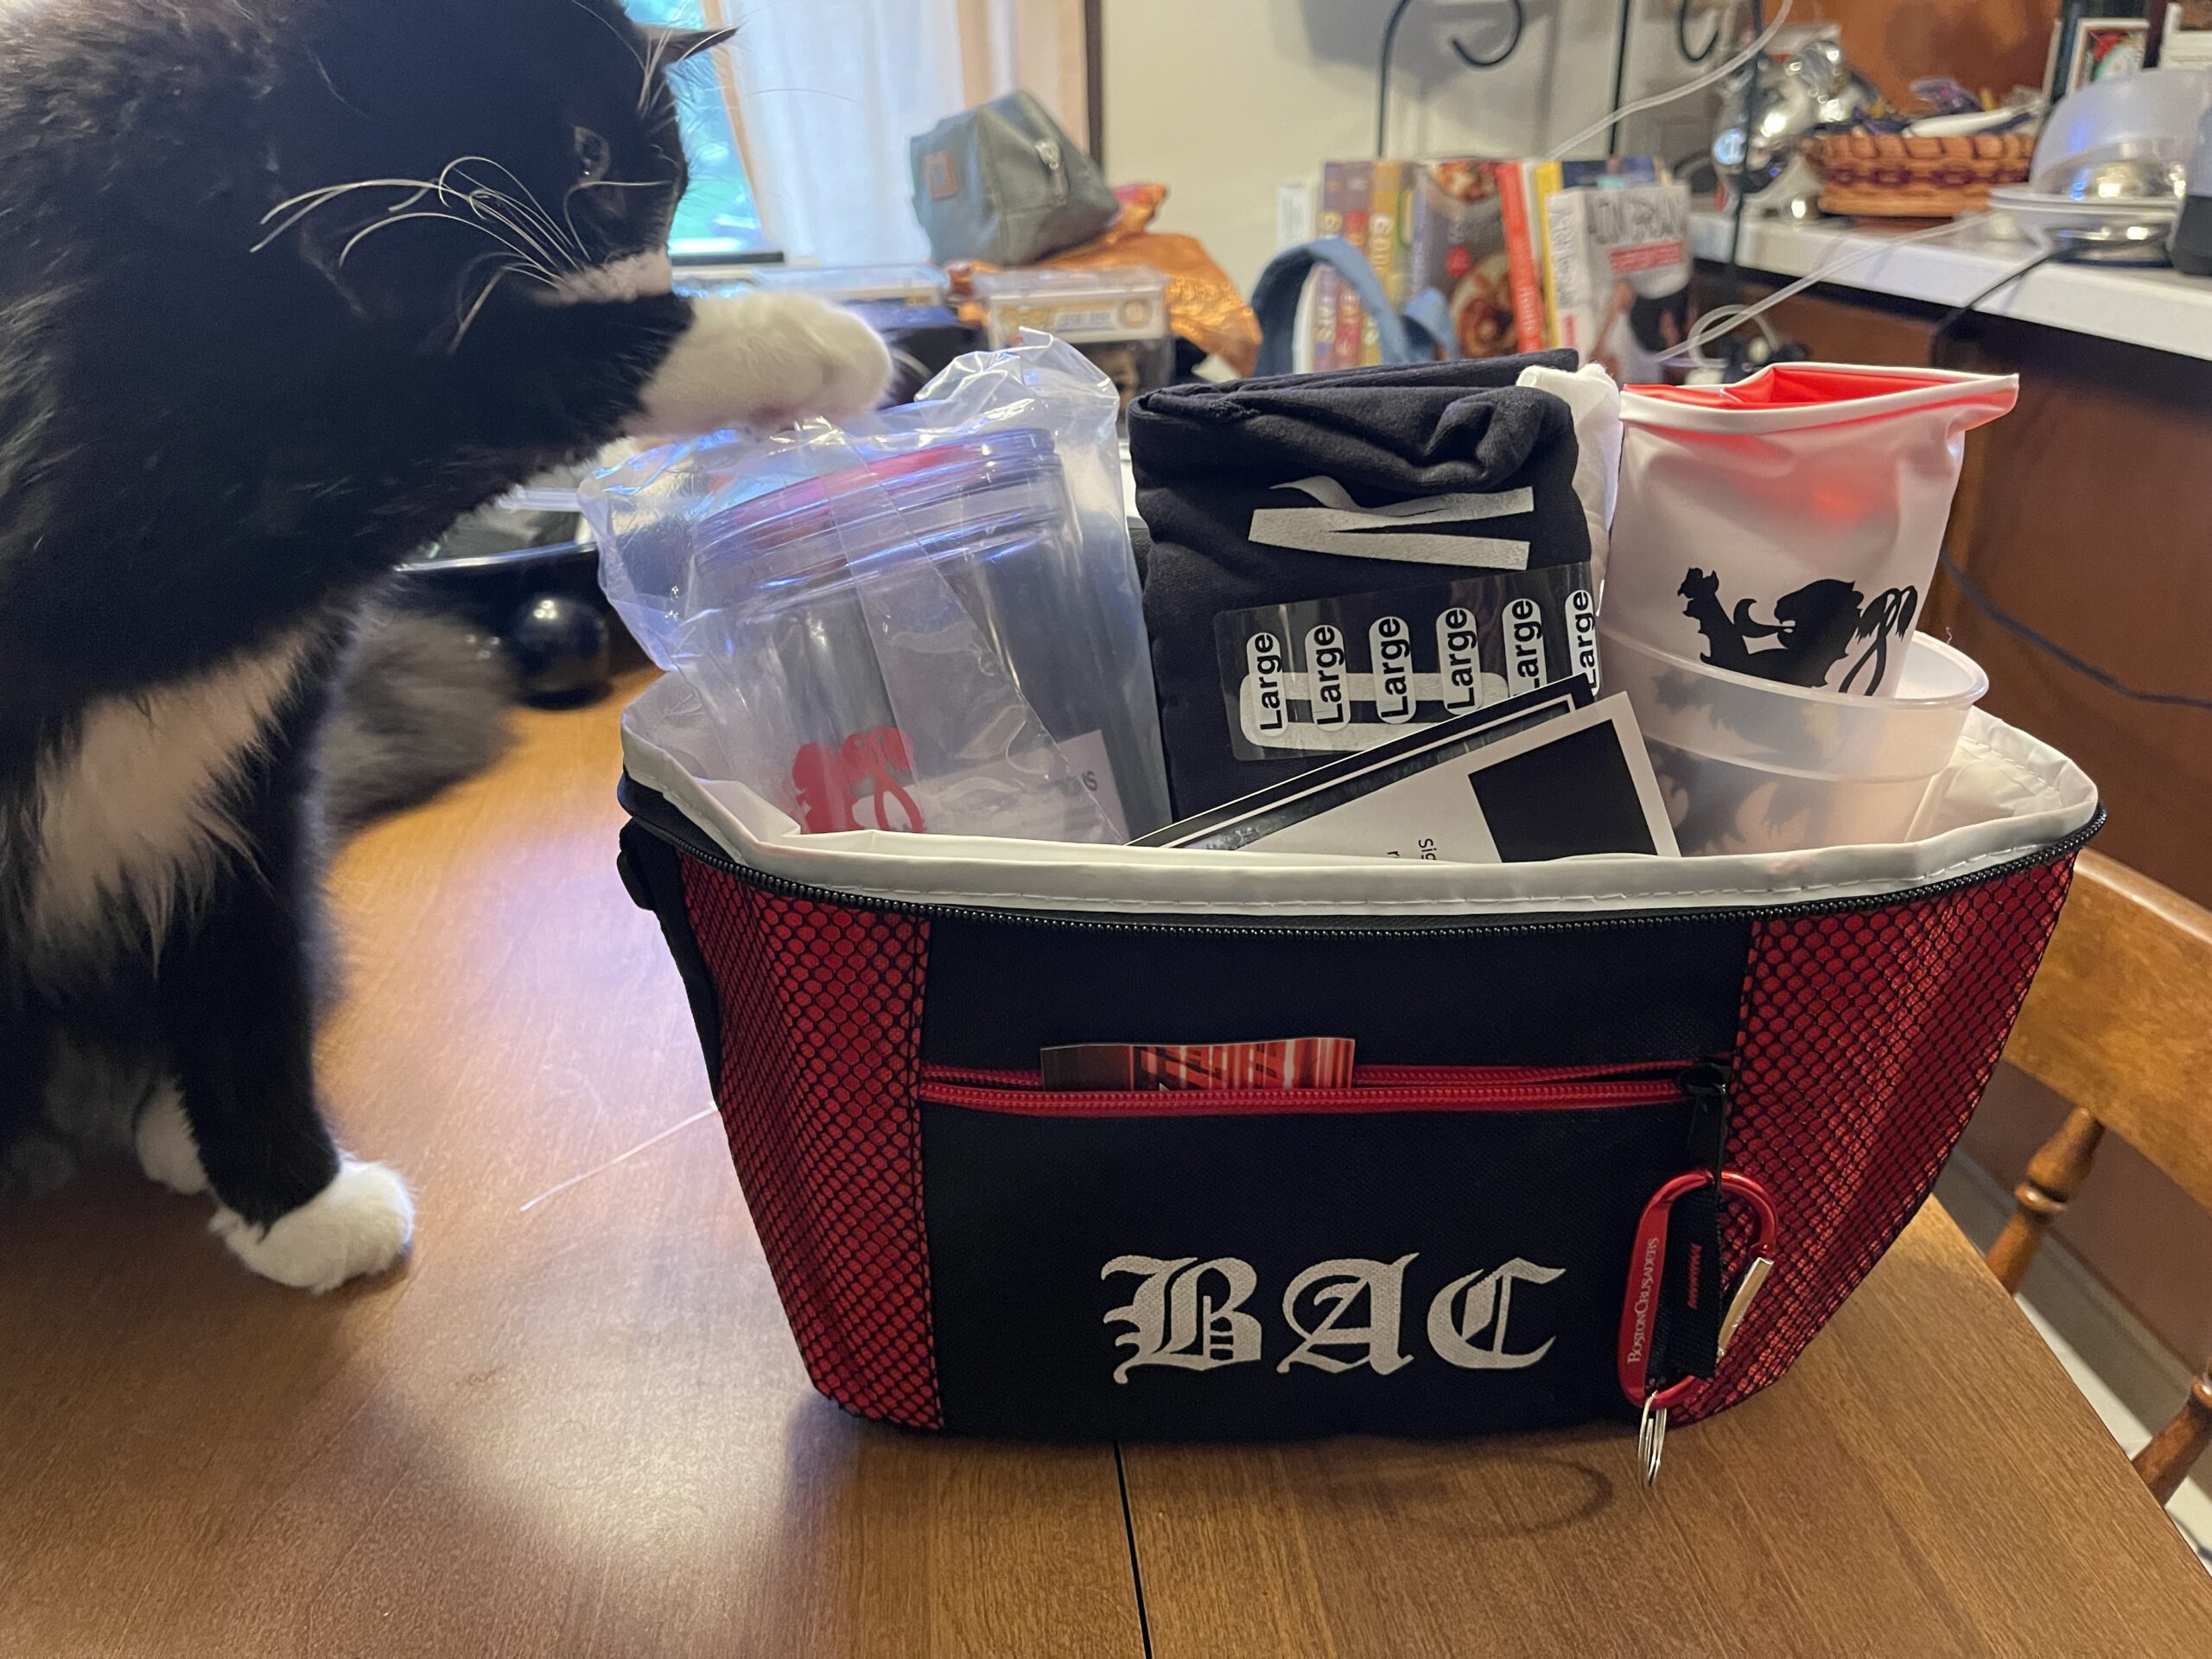 August 2021 Boston Crusaders Mystery Box - Contents